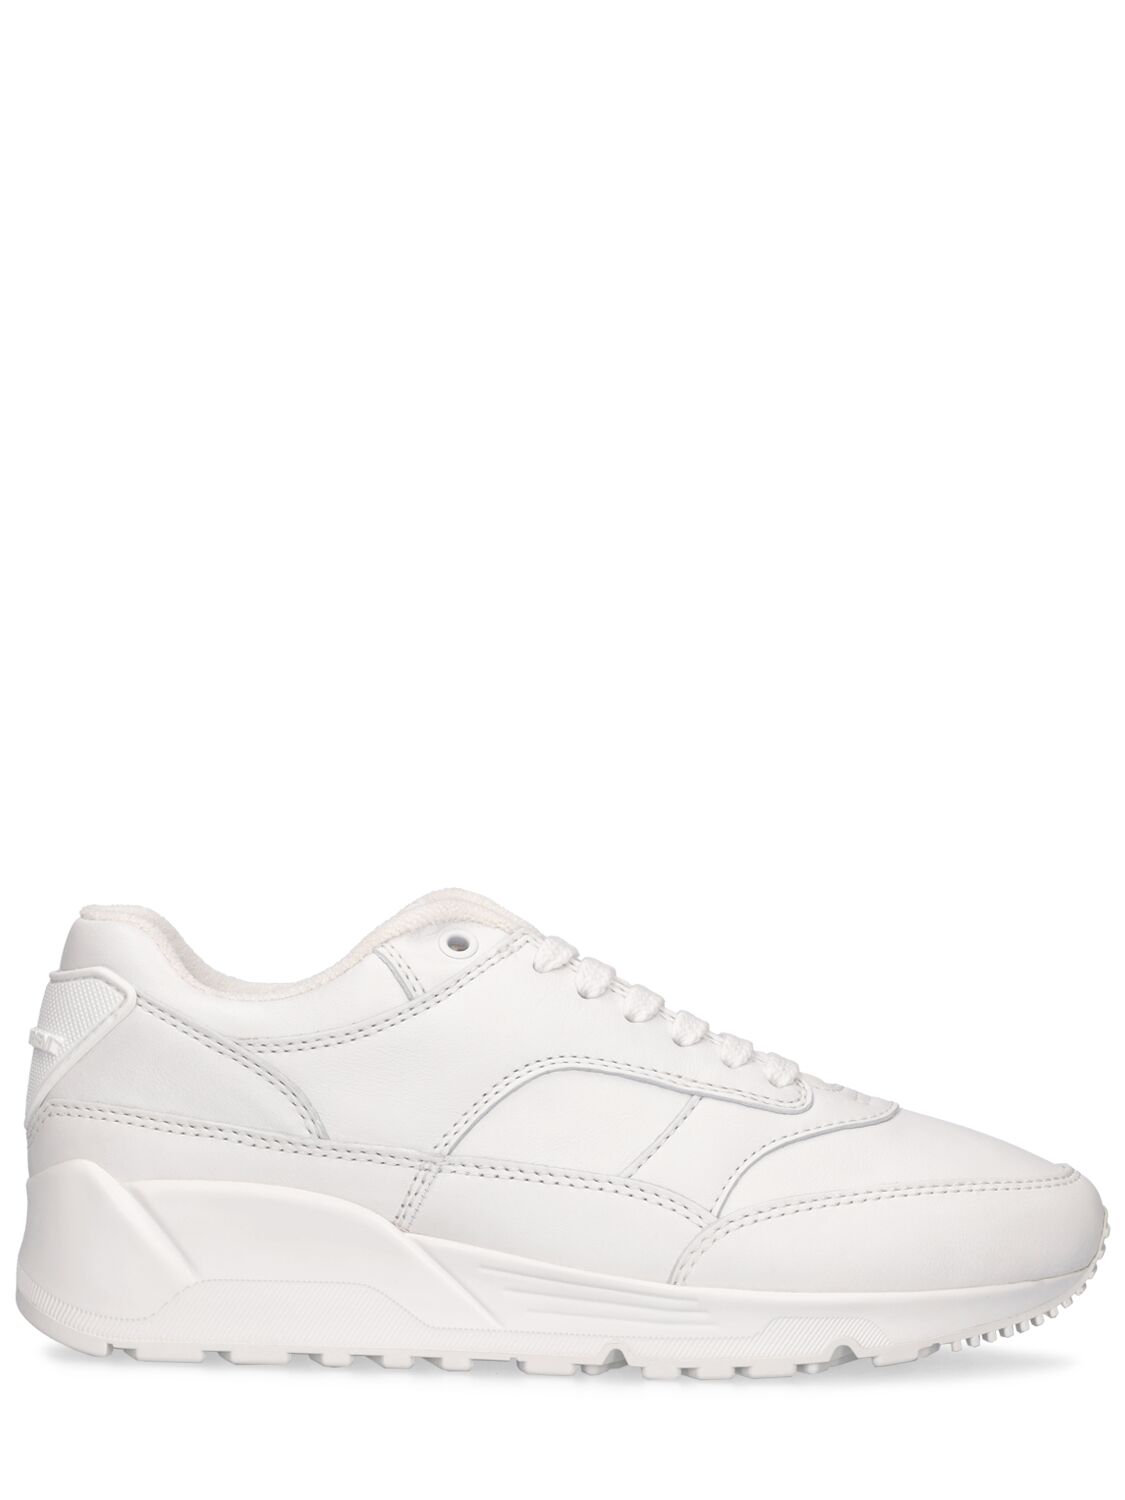 Bump Leather Sneakers